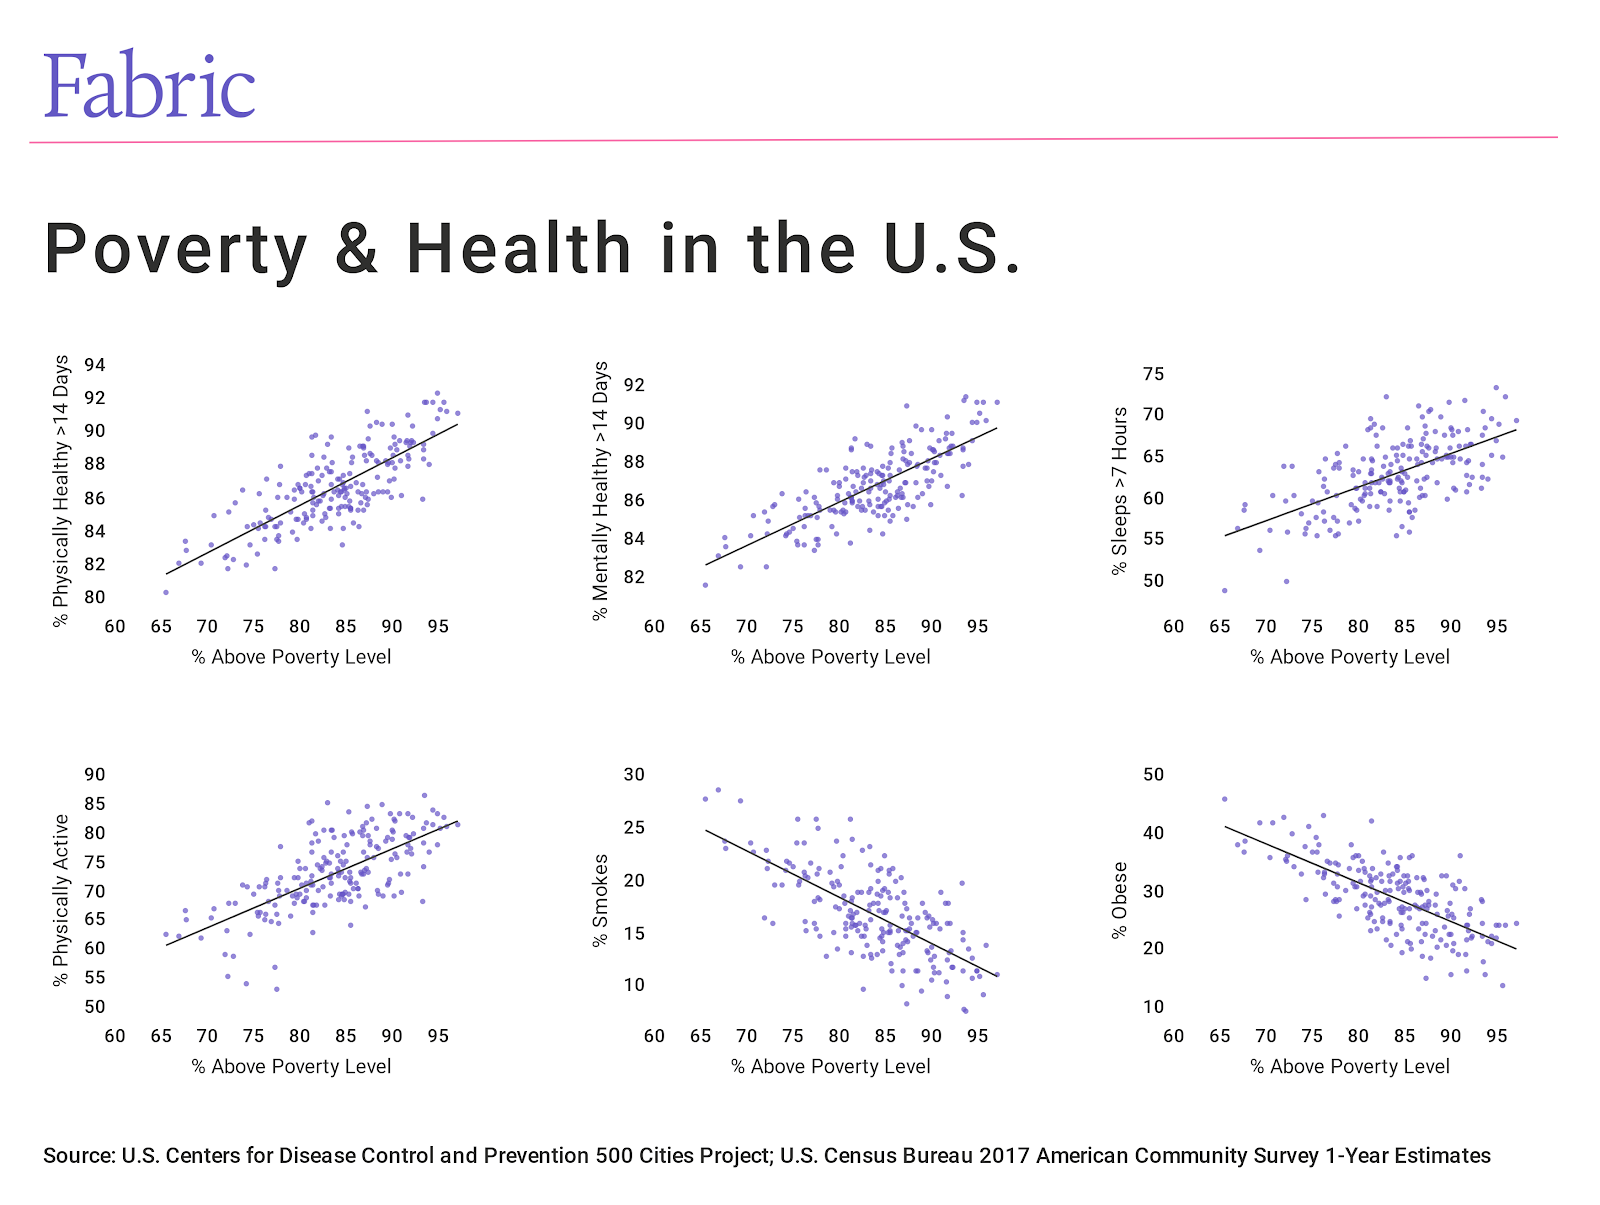 graph - how are poverty and health correlated in the U.S.?